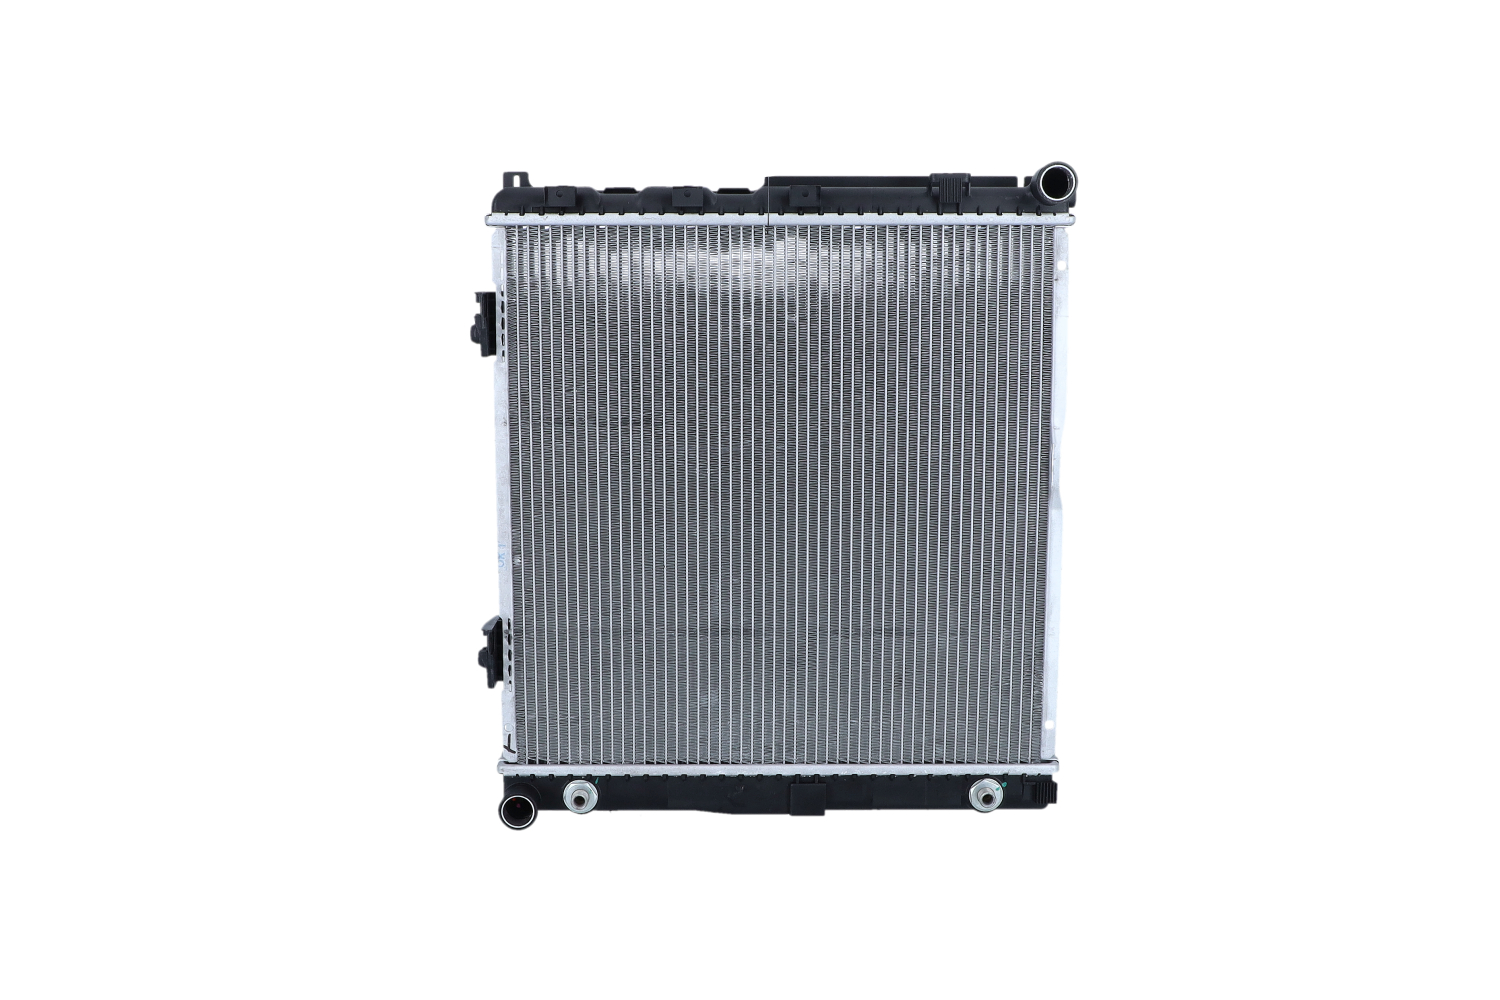 NRF 506575 Engine radiator Aluminium, 492 x 485 x 42 mm, with mounting parts, Brazed cooling fins